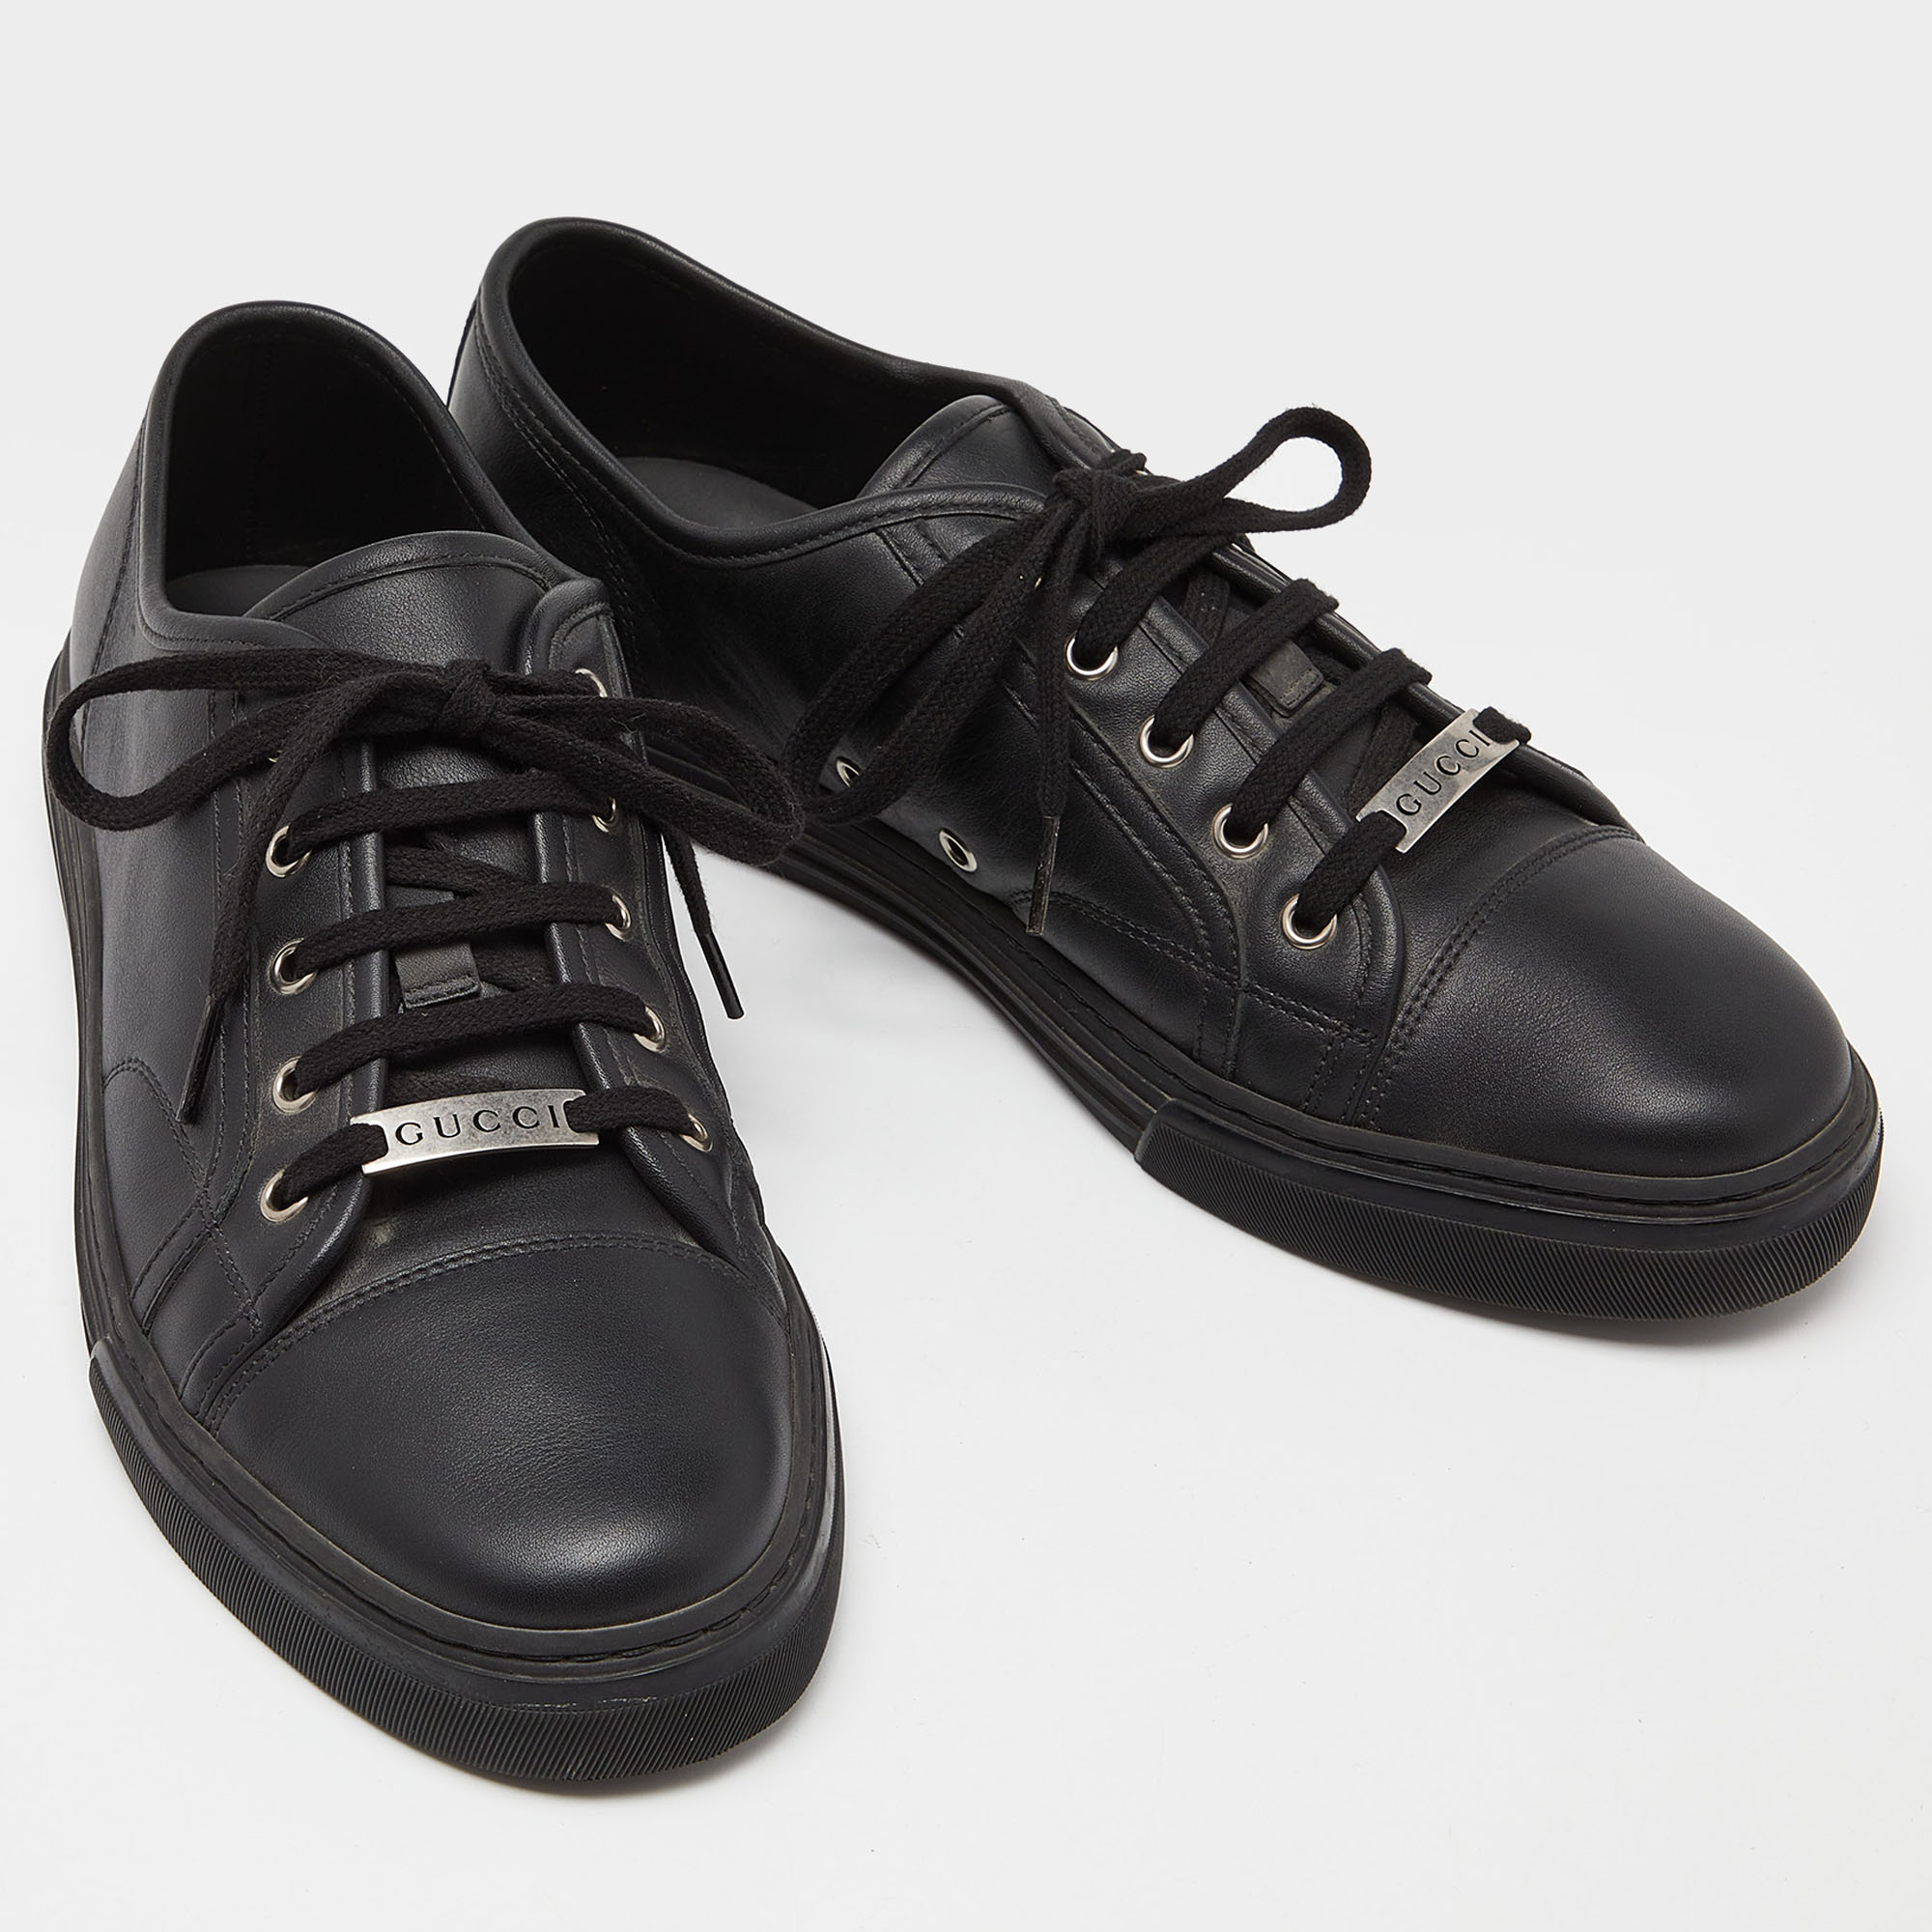 Gucci Black Leather Low Top Sneakers Size 43